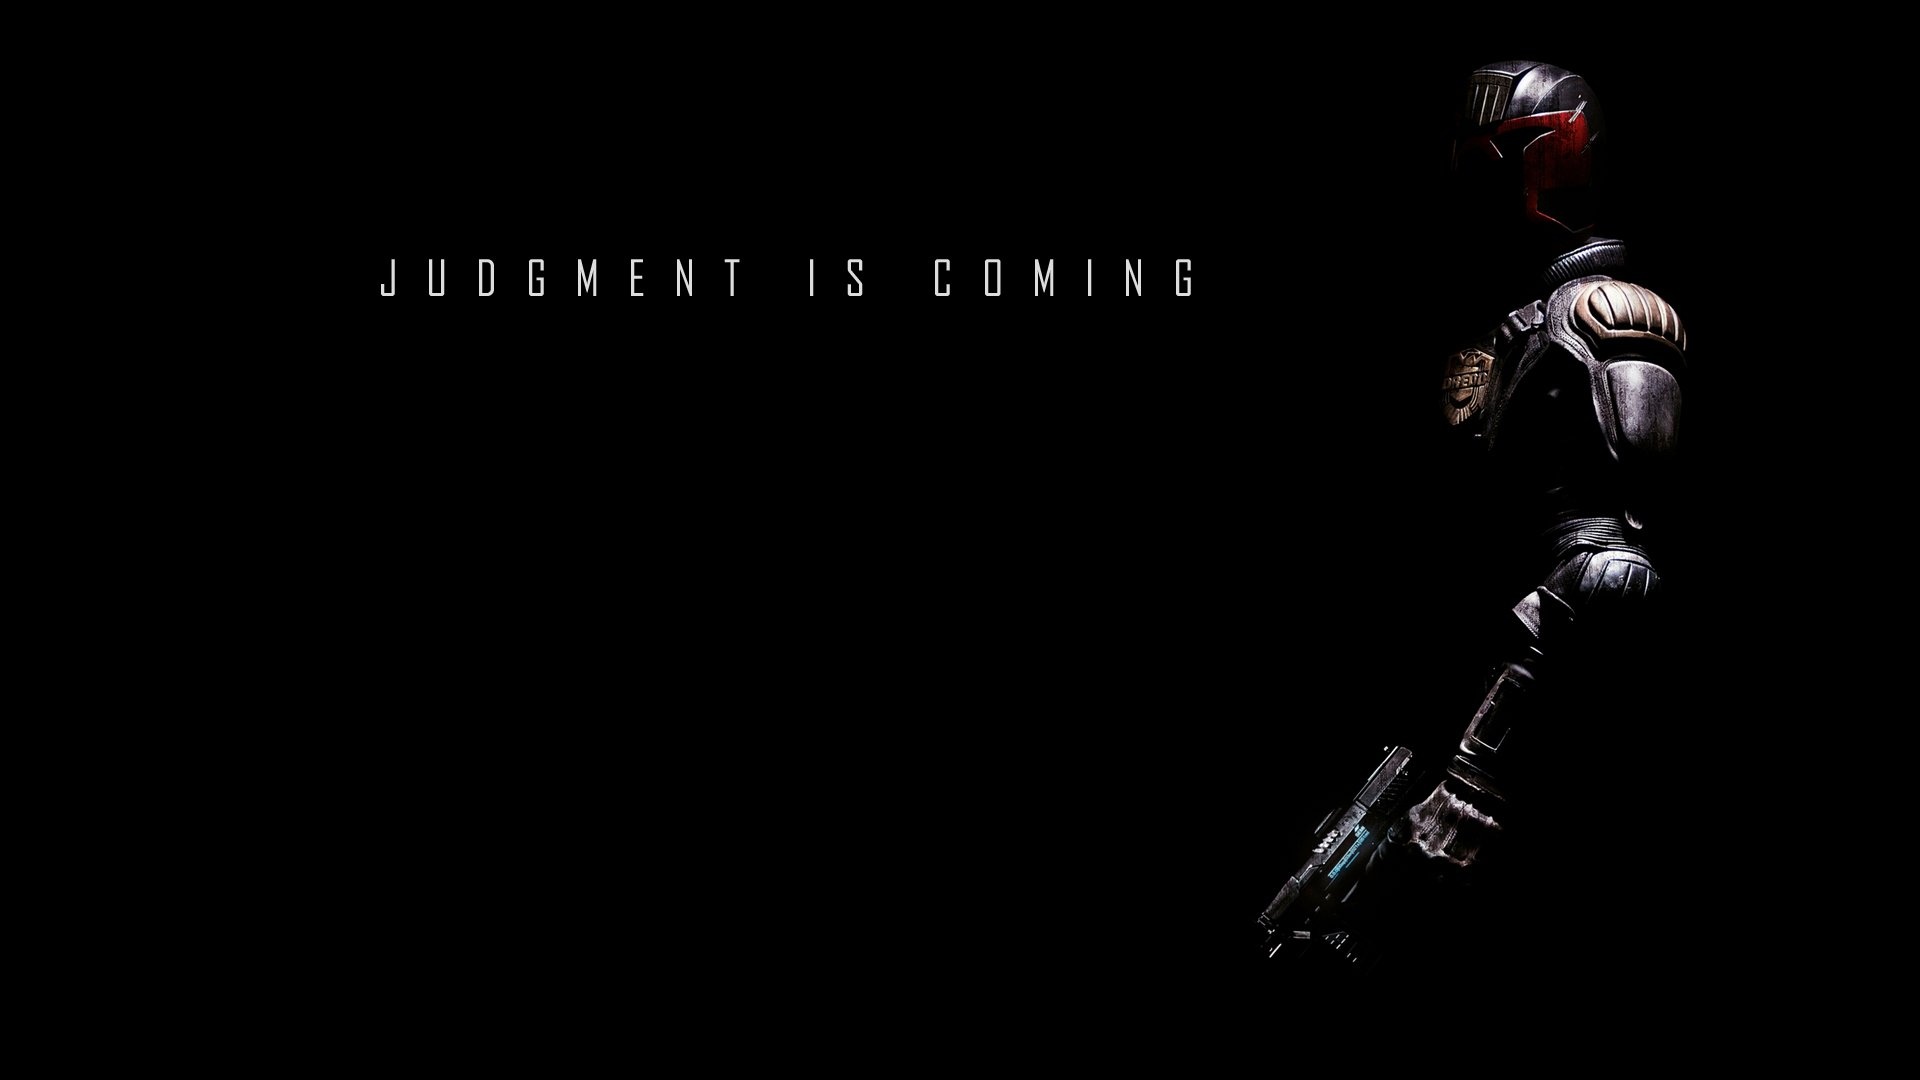 Dredd movie, HD wallpapers, Graphic novel, Action-packed, 1920x1080 Full HD Desktop